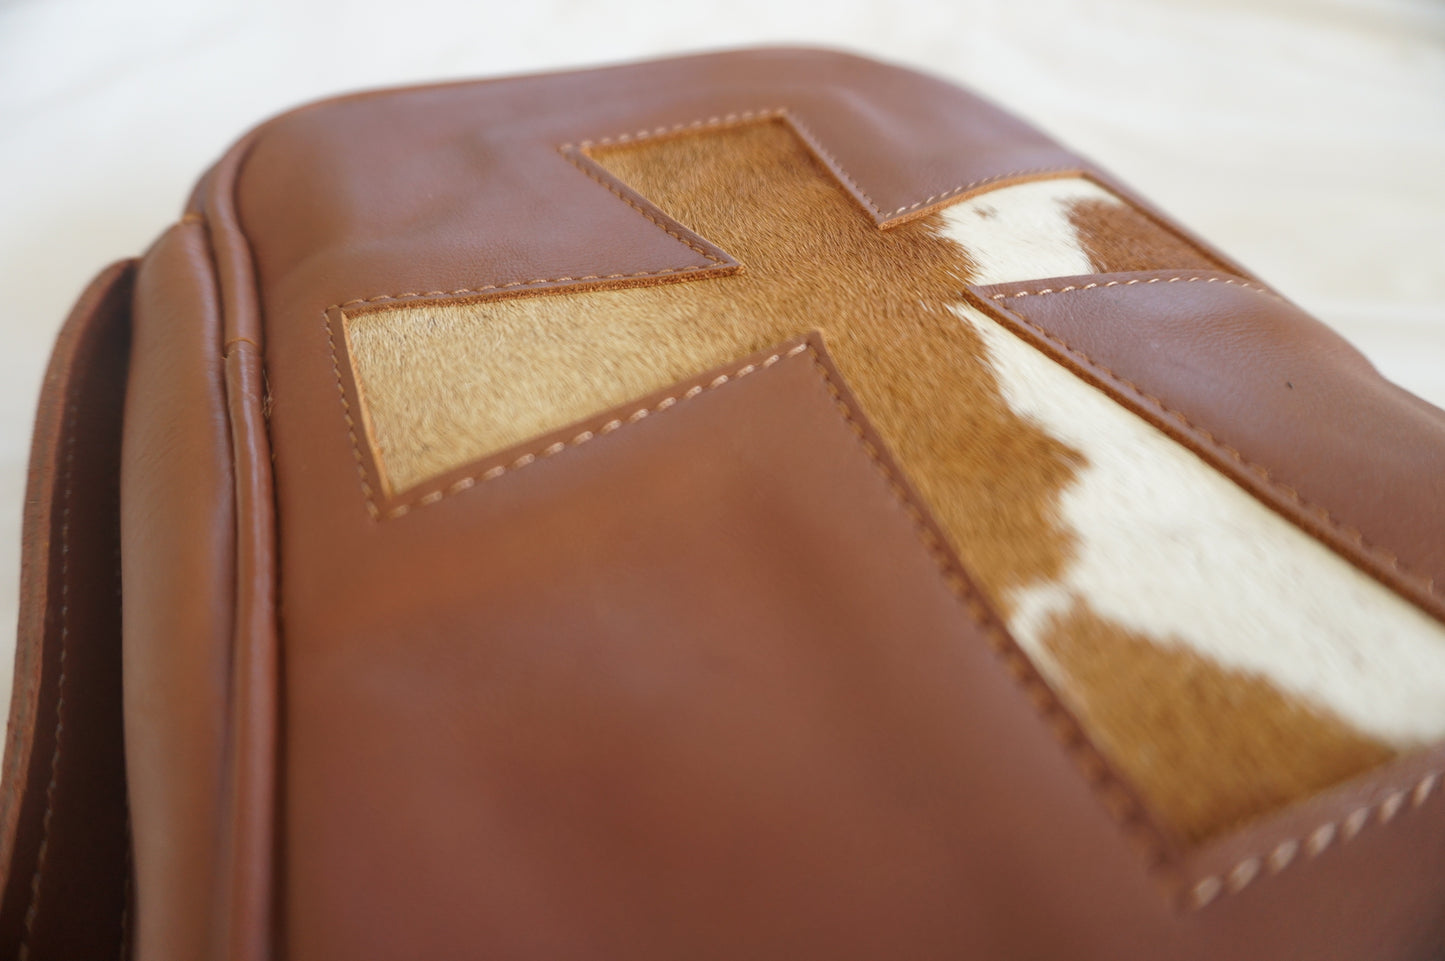 Leather Bible Covers / Cases